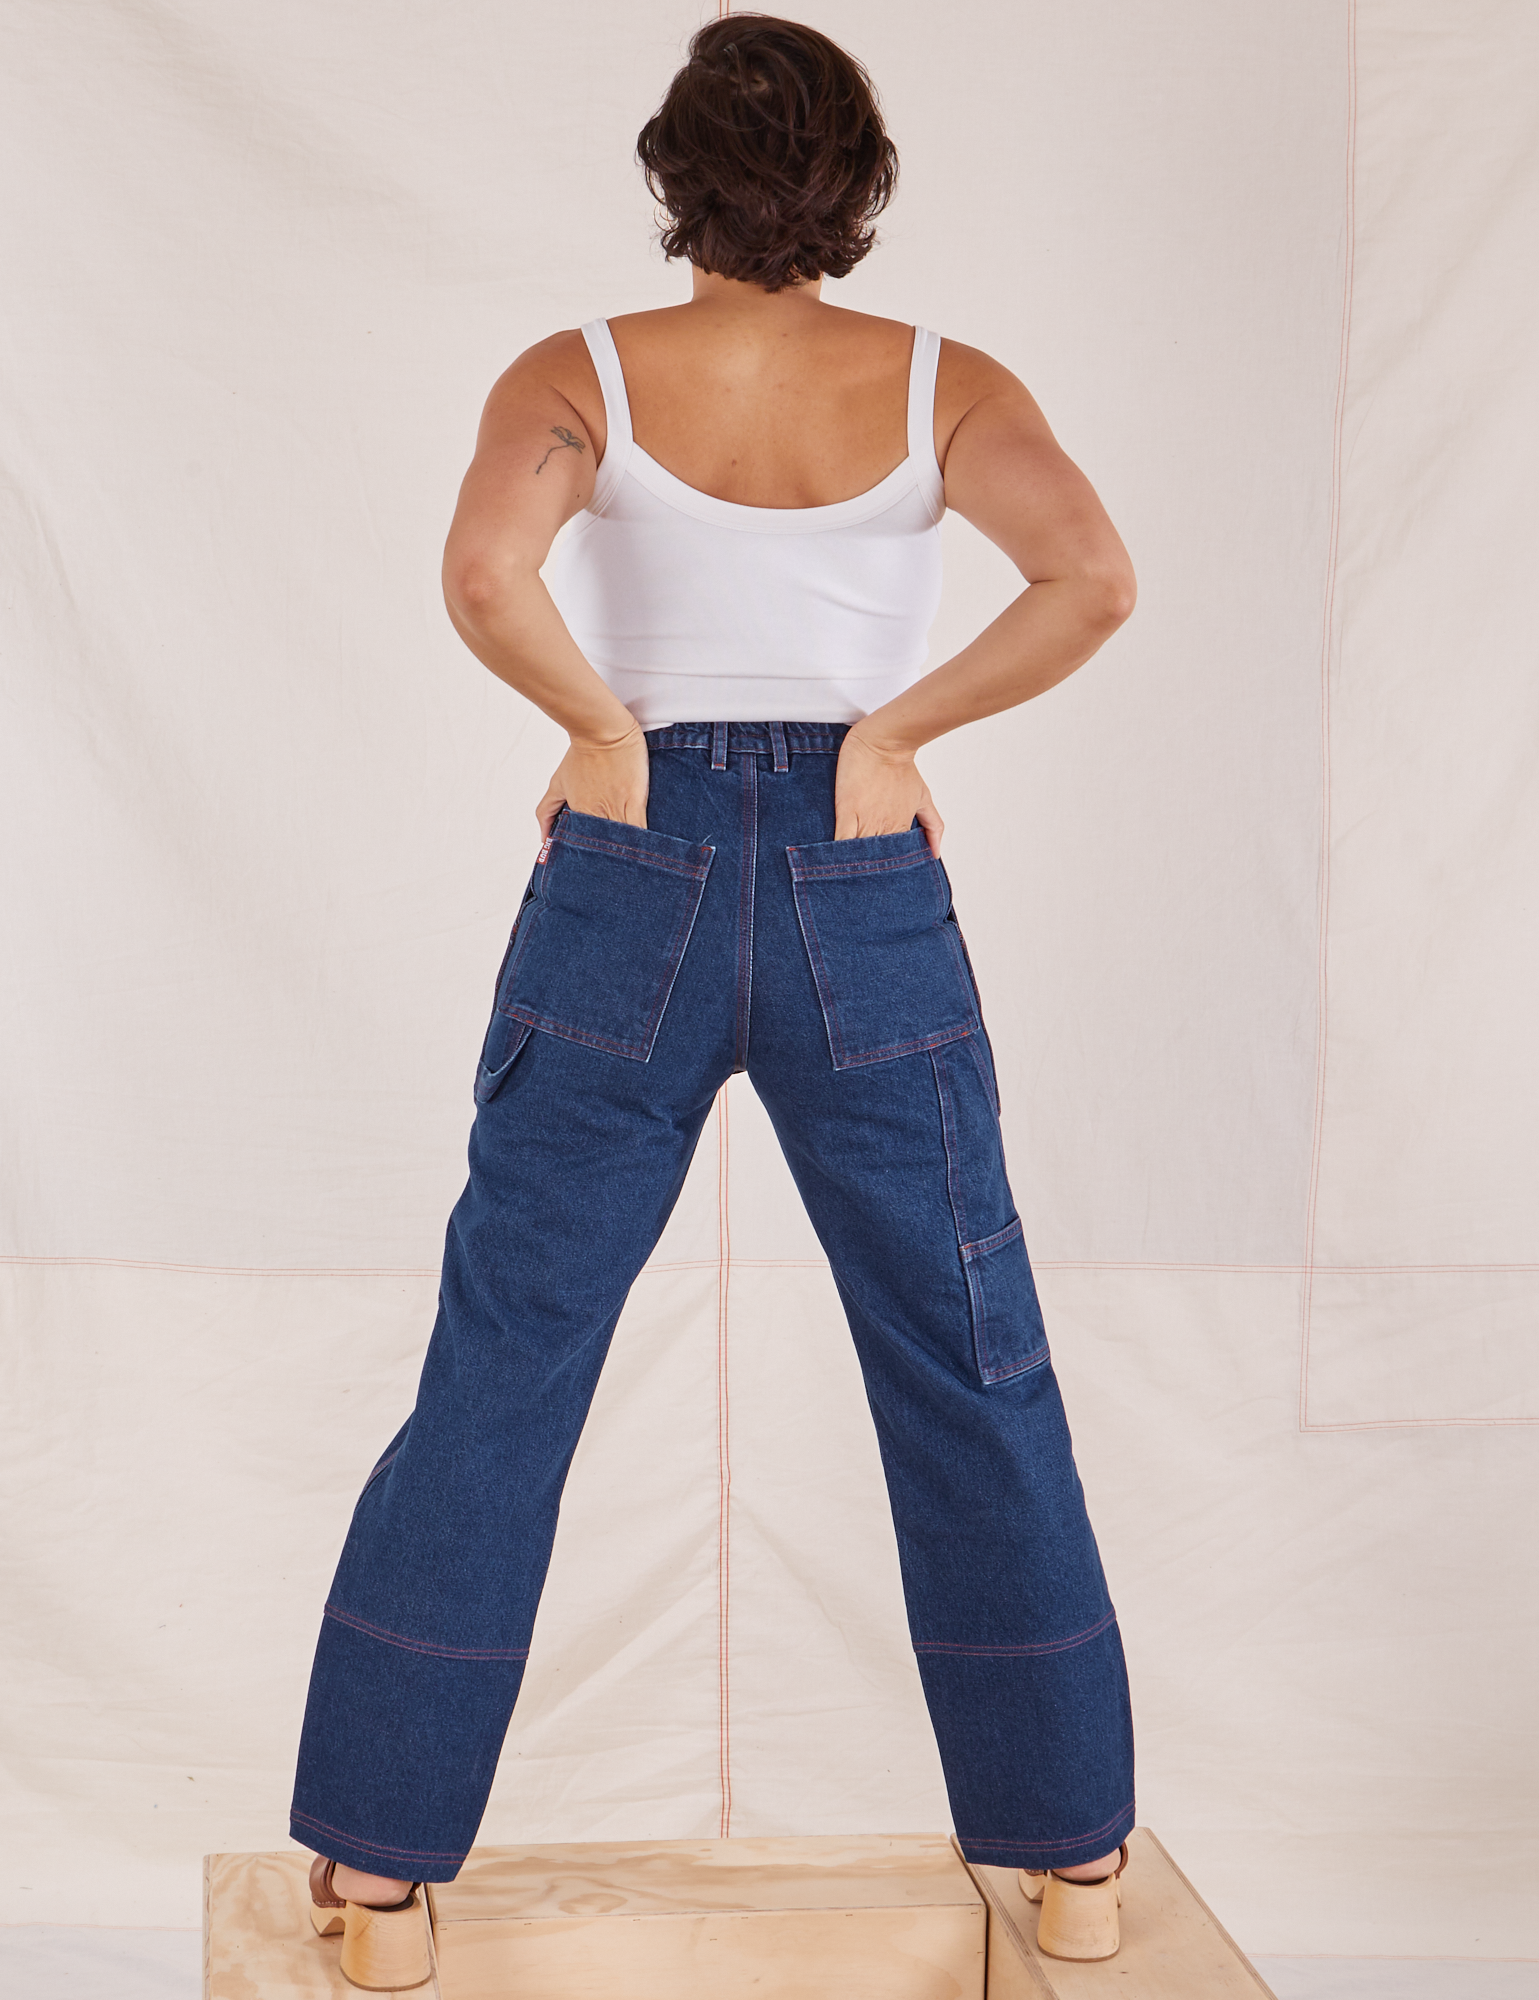 Back view of Carpenter Jeans in Dark Wash and Cropped Cami in vintage tee off-white Tiara has both hands in the back pocket.